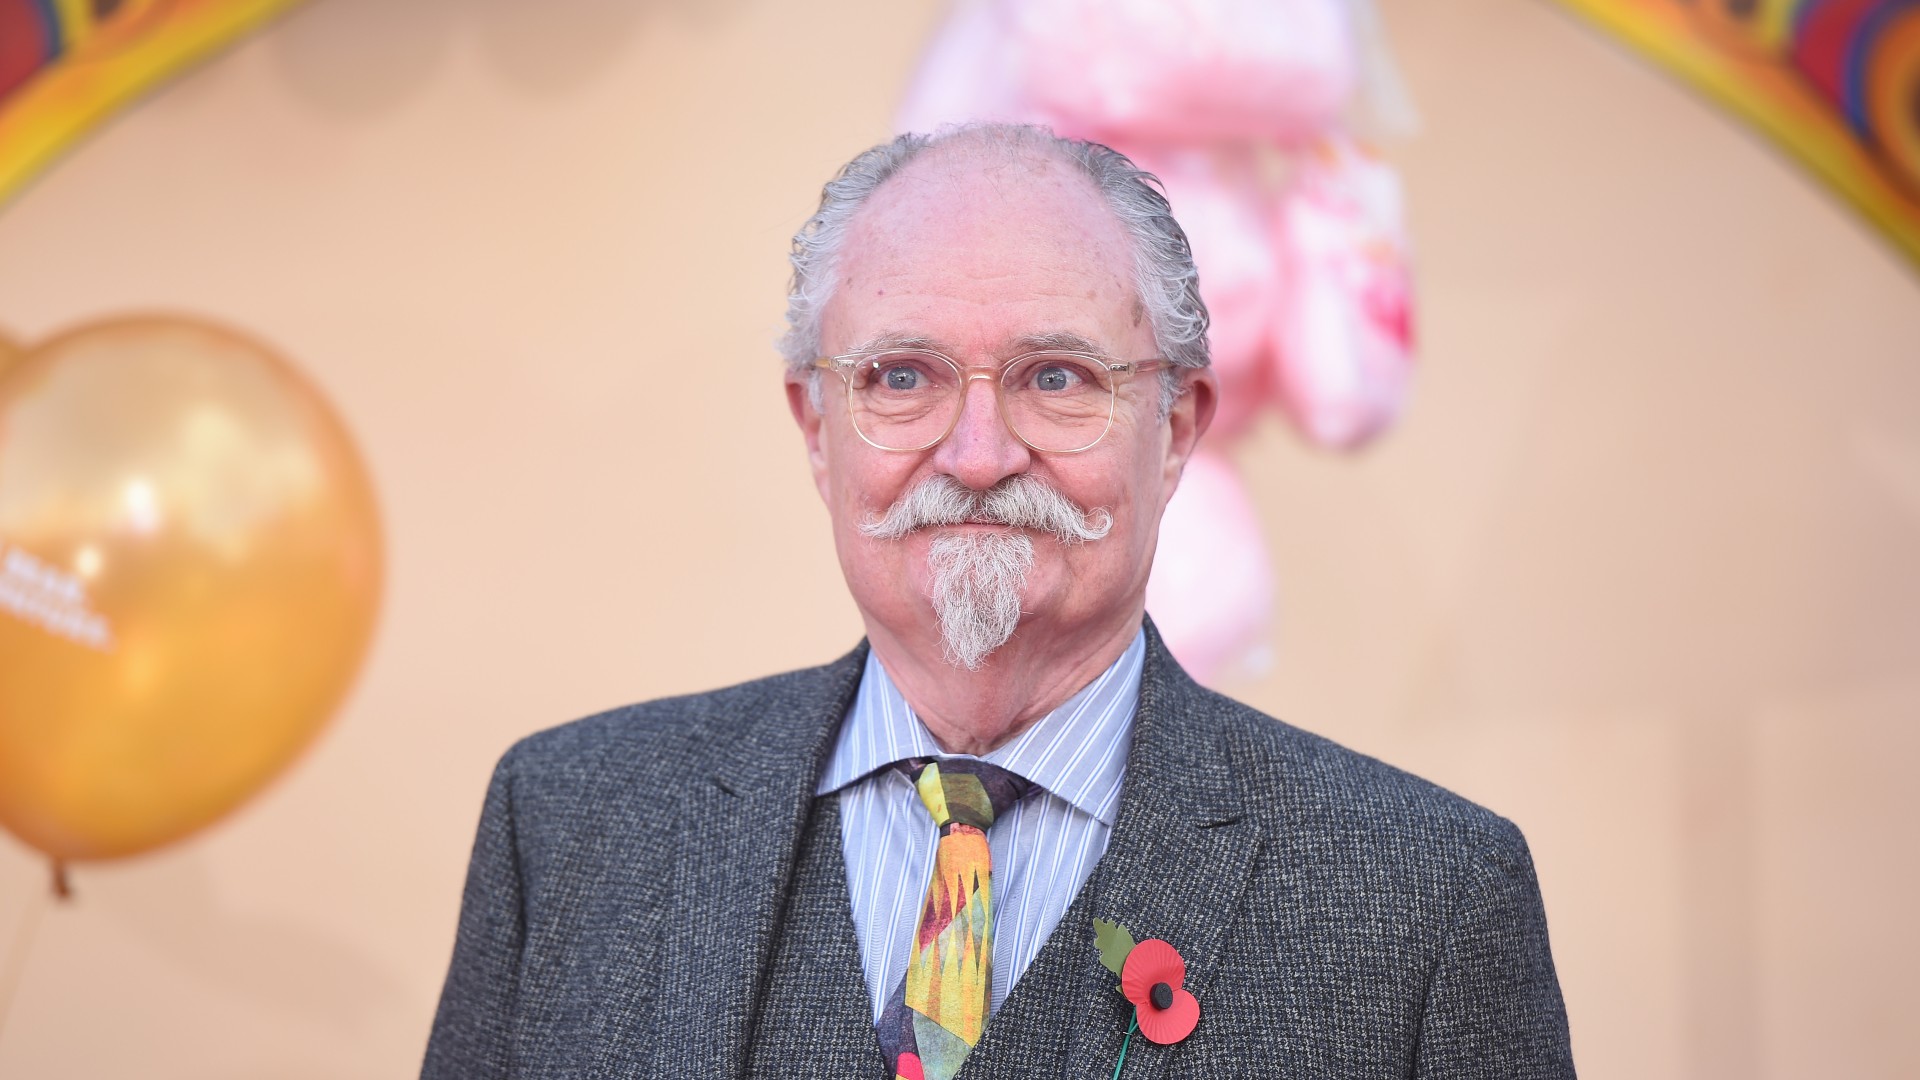 Casting News: Jim Broadbent to Star in U.K. Remake of 'Call My Agent!'